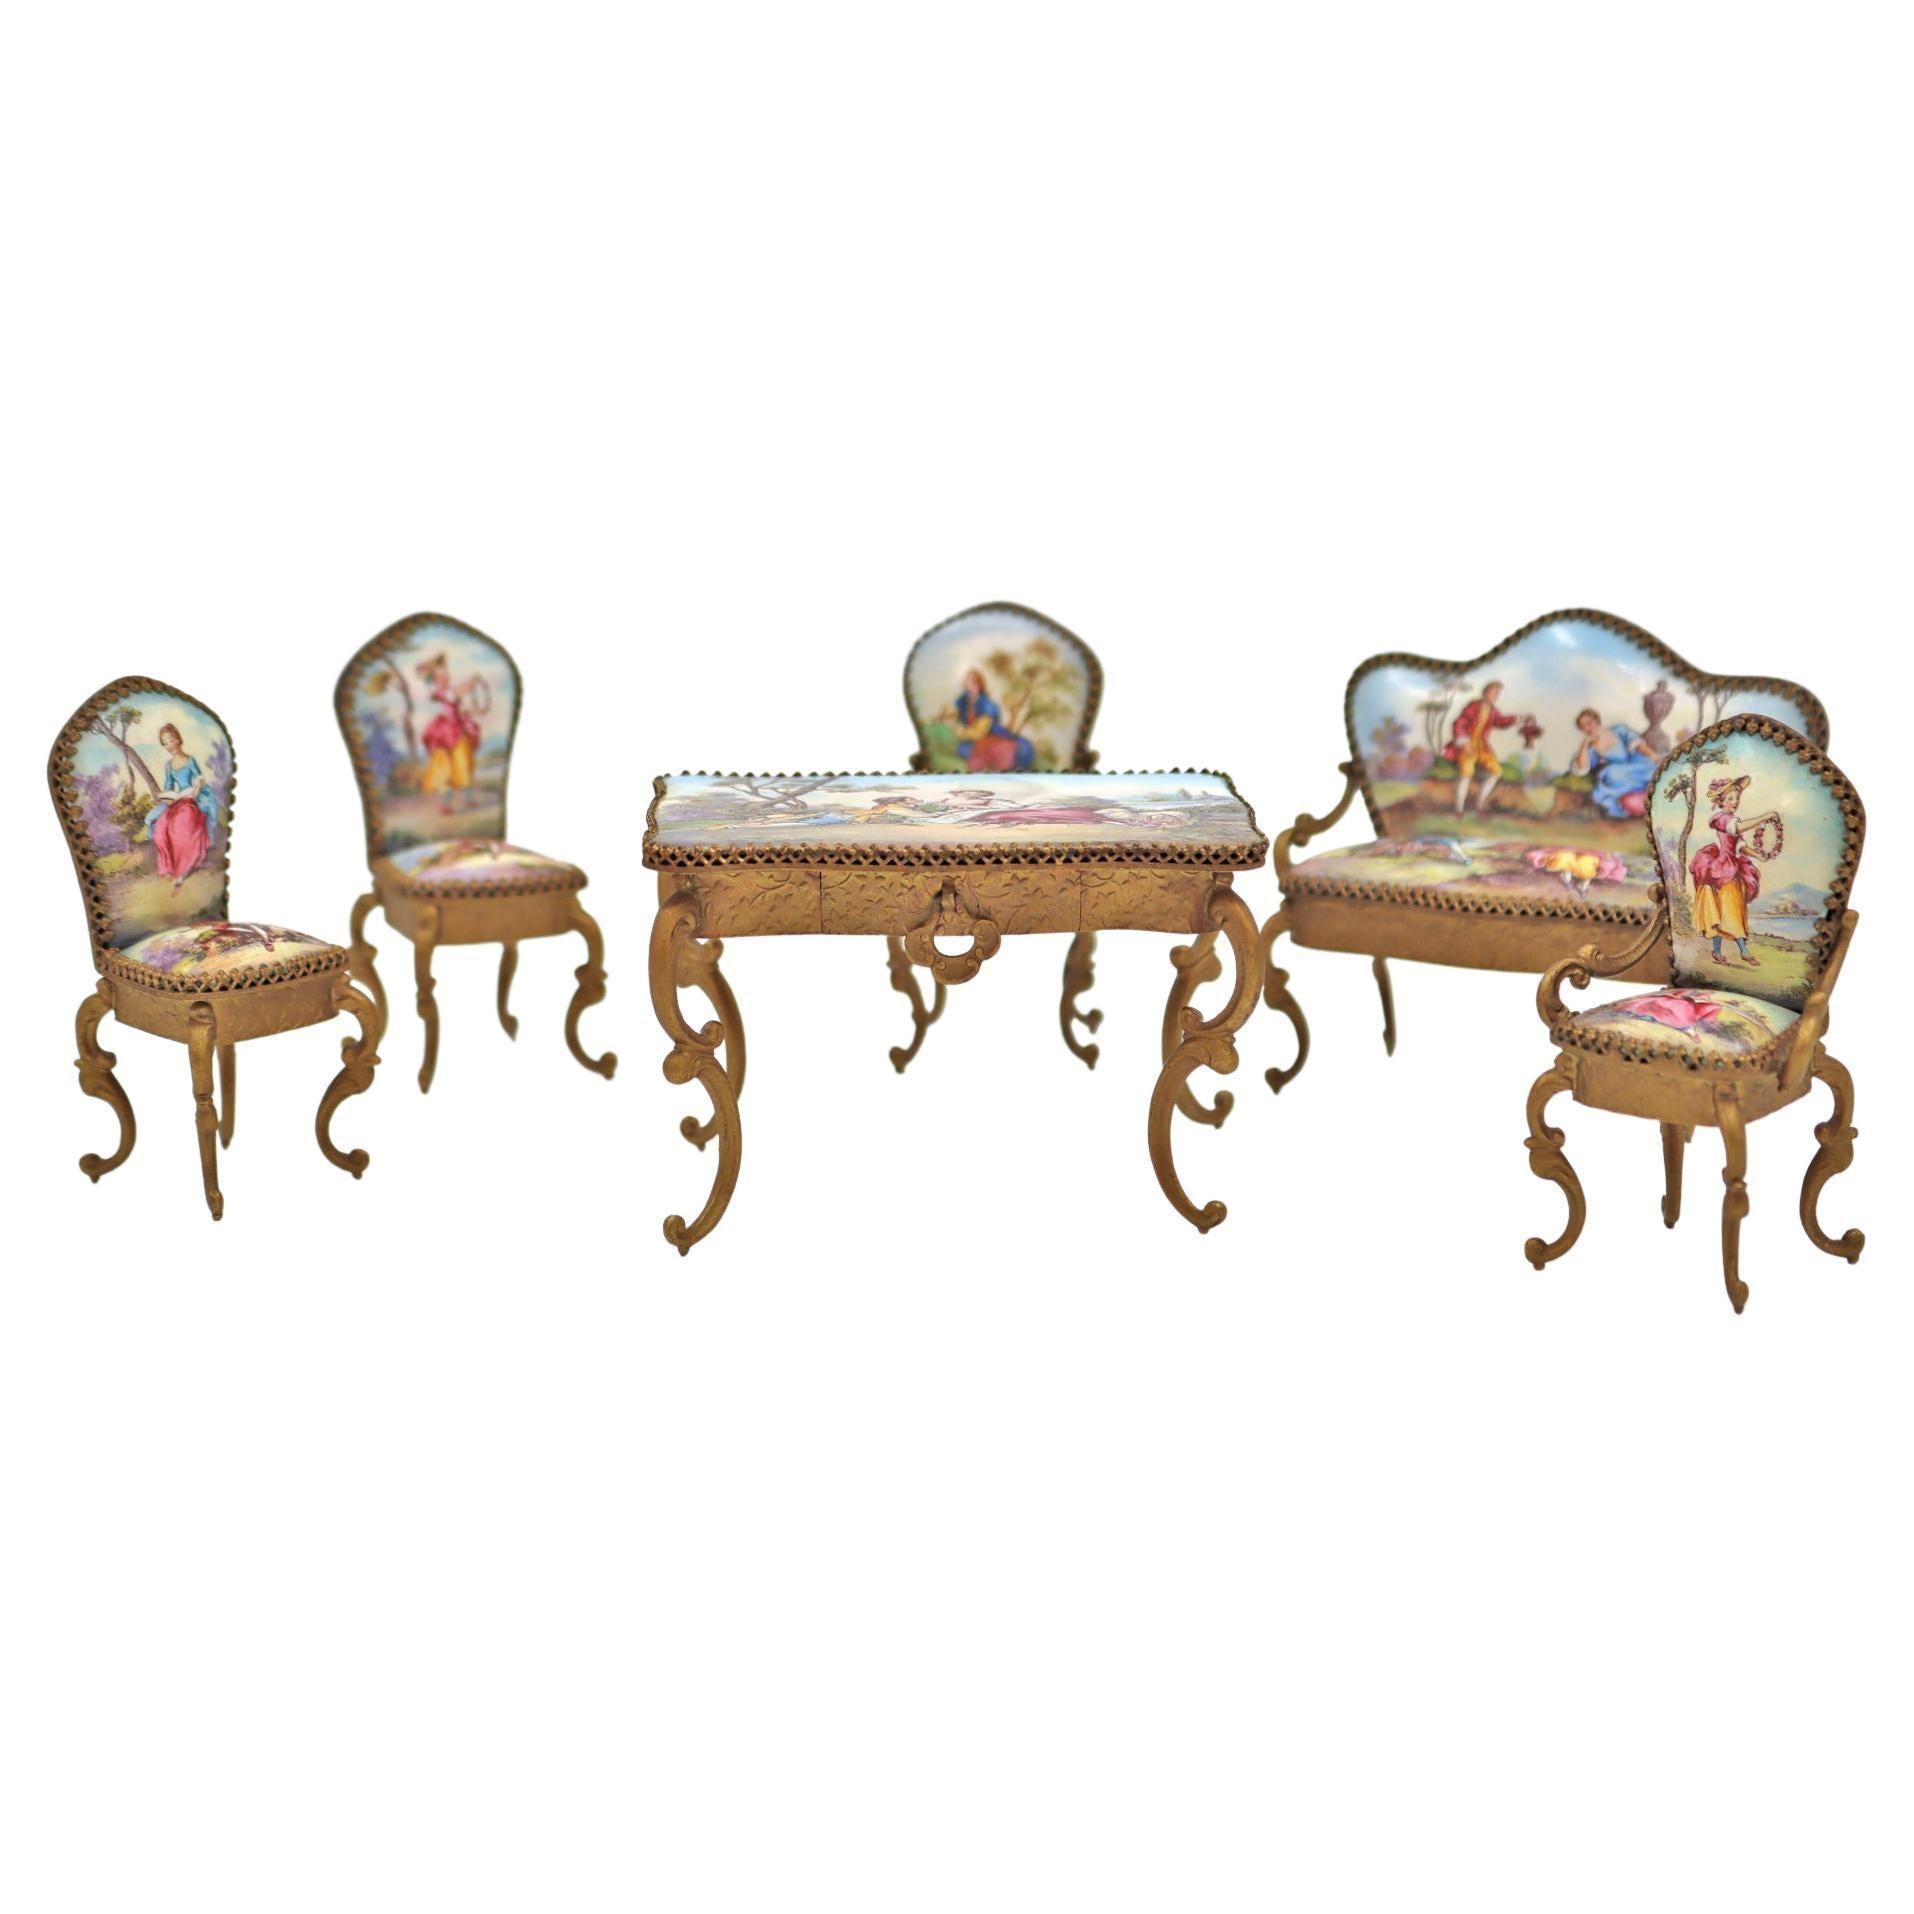 Small painted porcelain and gilt metal salon, 19th century, Napoleon III period.
Measures: Table - h: 5.5 cm, w: 8 cm, d: 6 cm
Seats - h: 7 cm, w: 4 cm, d: 3 cm
Sofa - h: 7 cm, w: 8,5 cm, d: 4 cm.